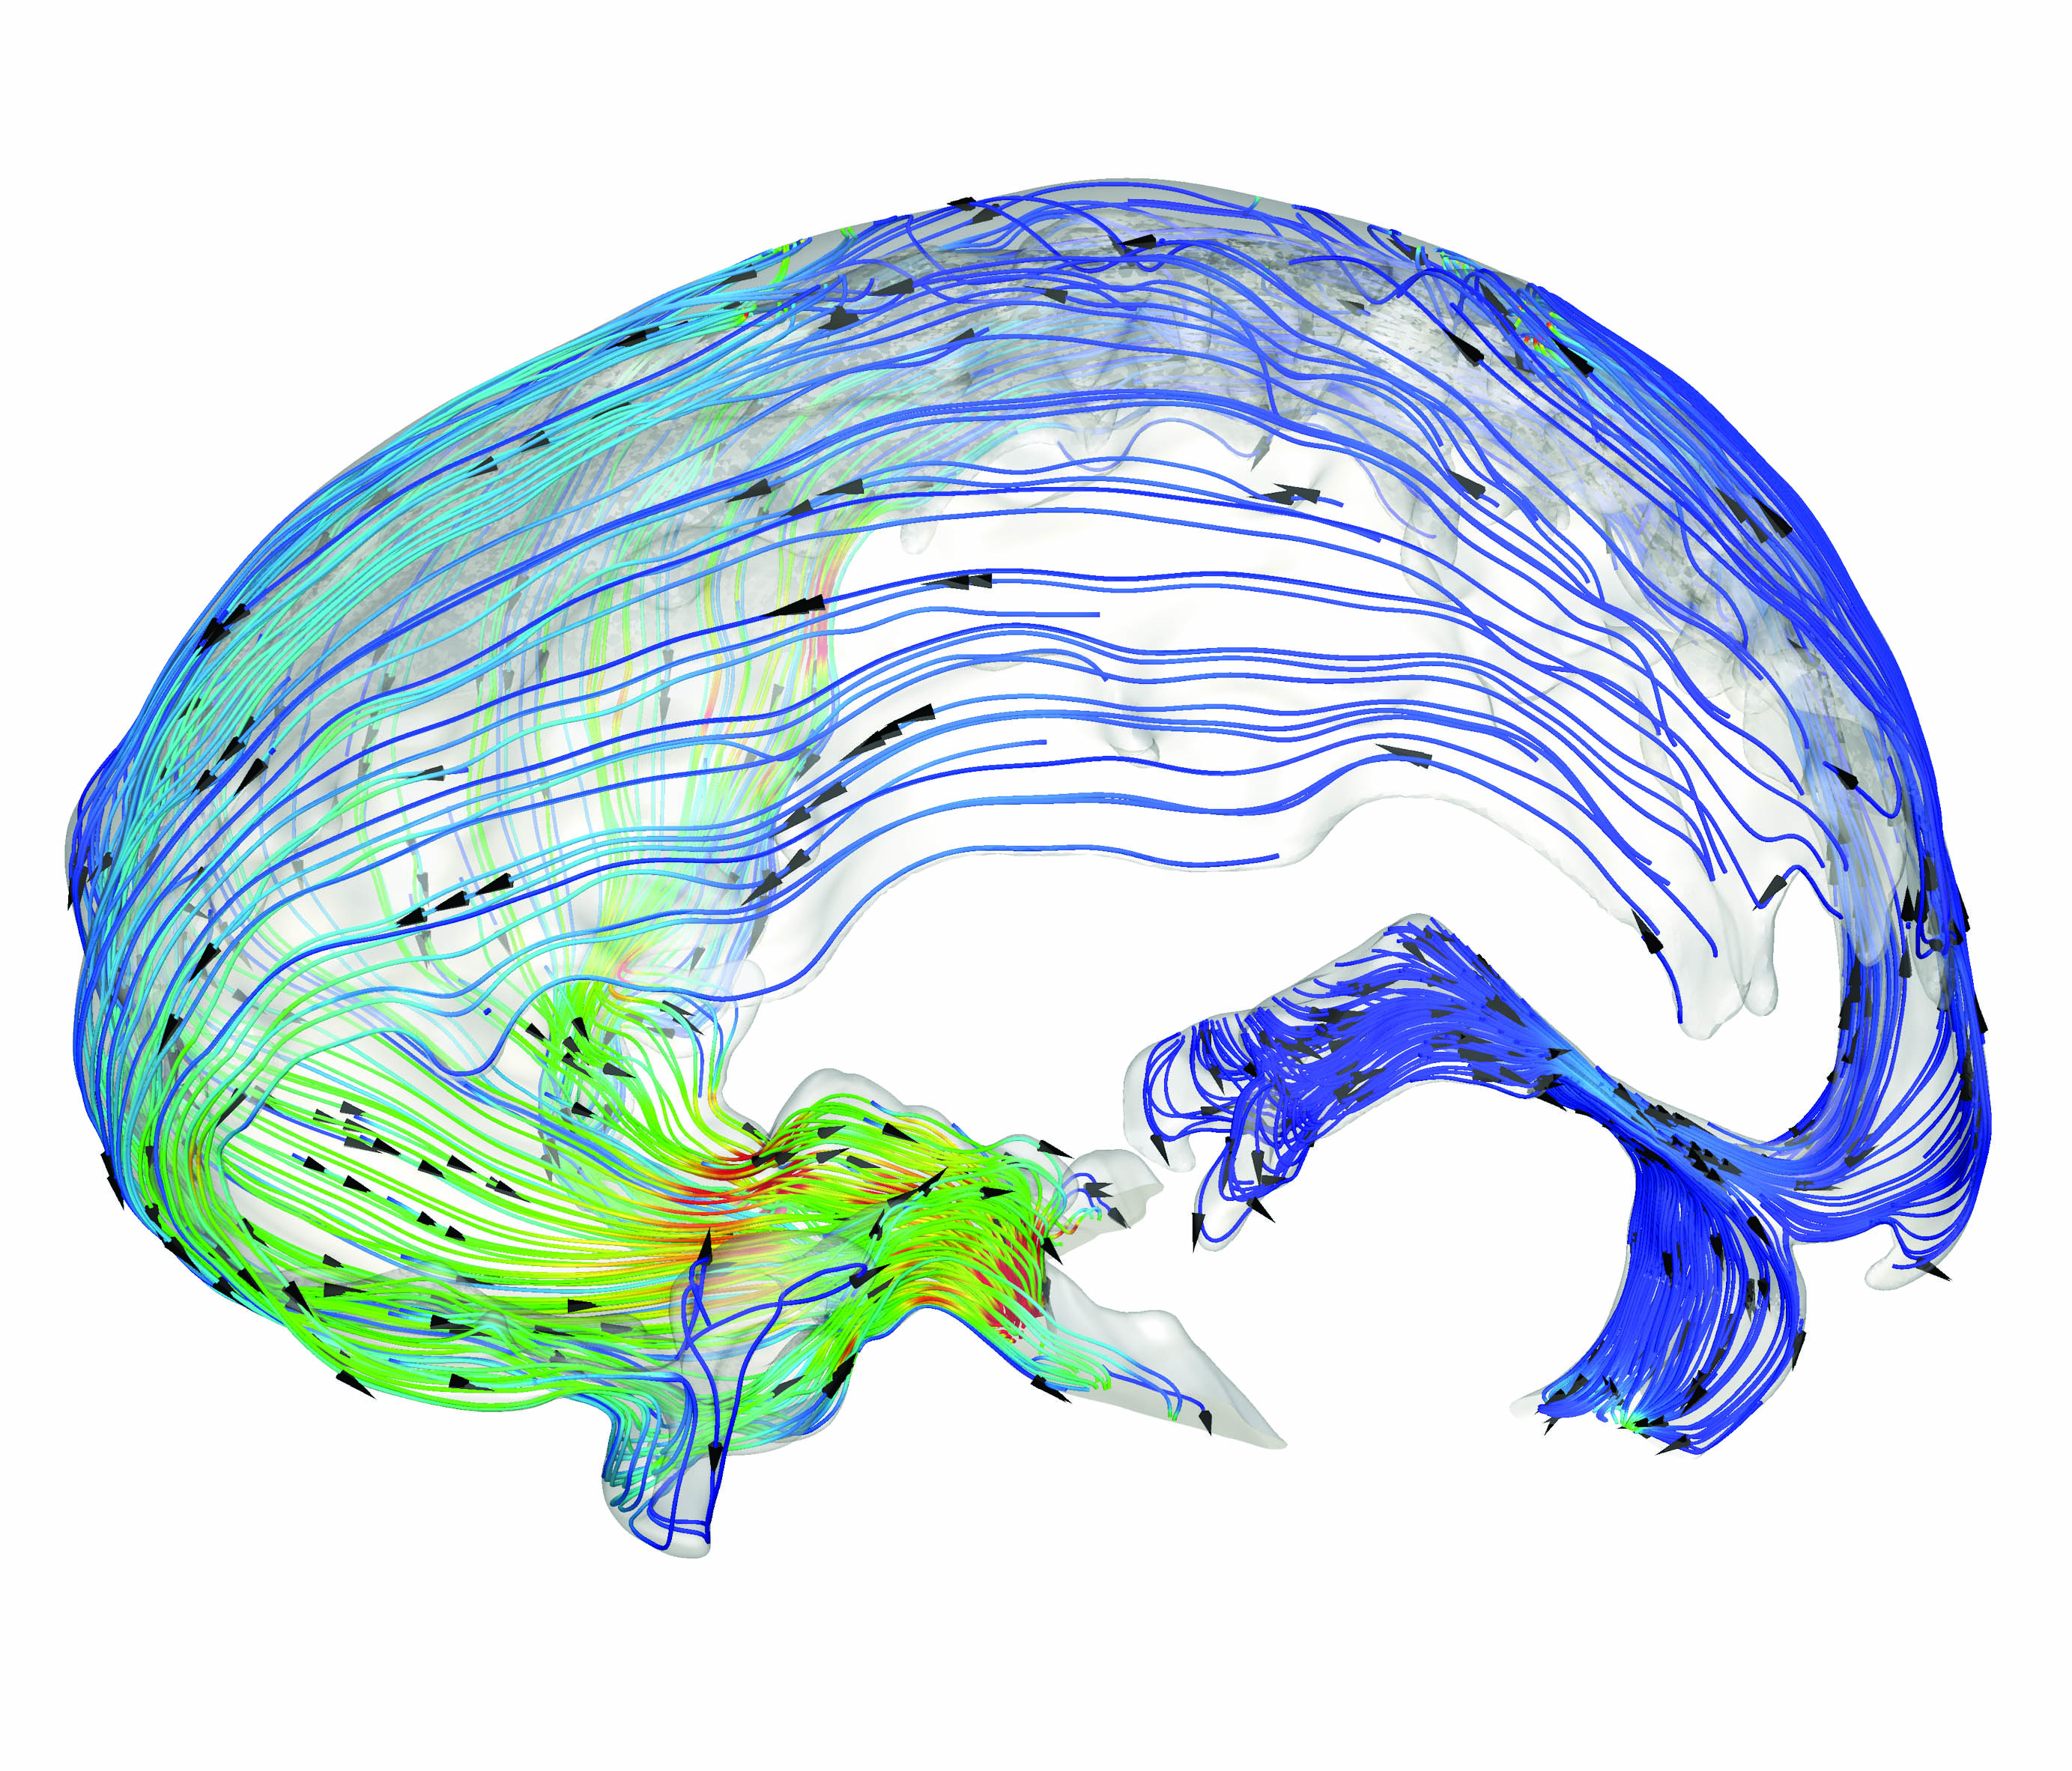 Visualization of instantaneous cerebrospinal fluid flow in the cranial subarachnoid space of a healthy male human volunteer.